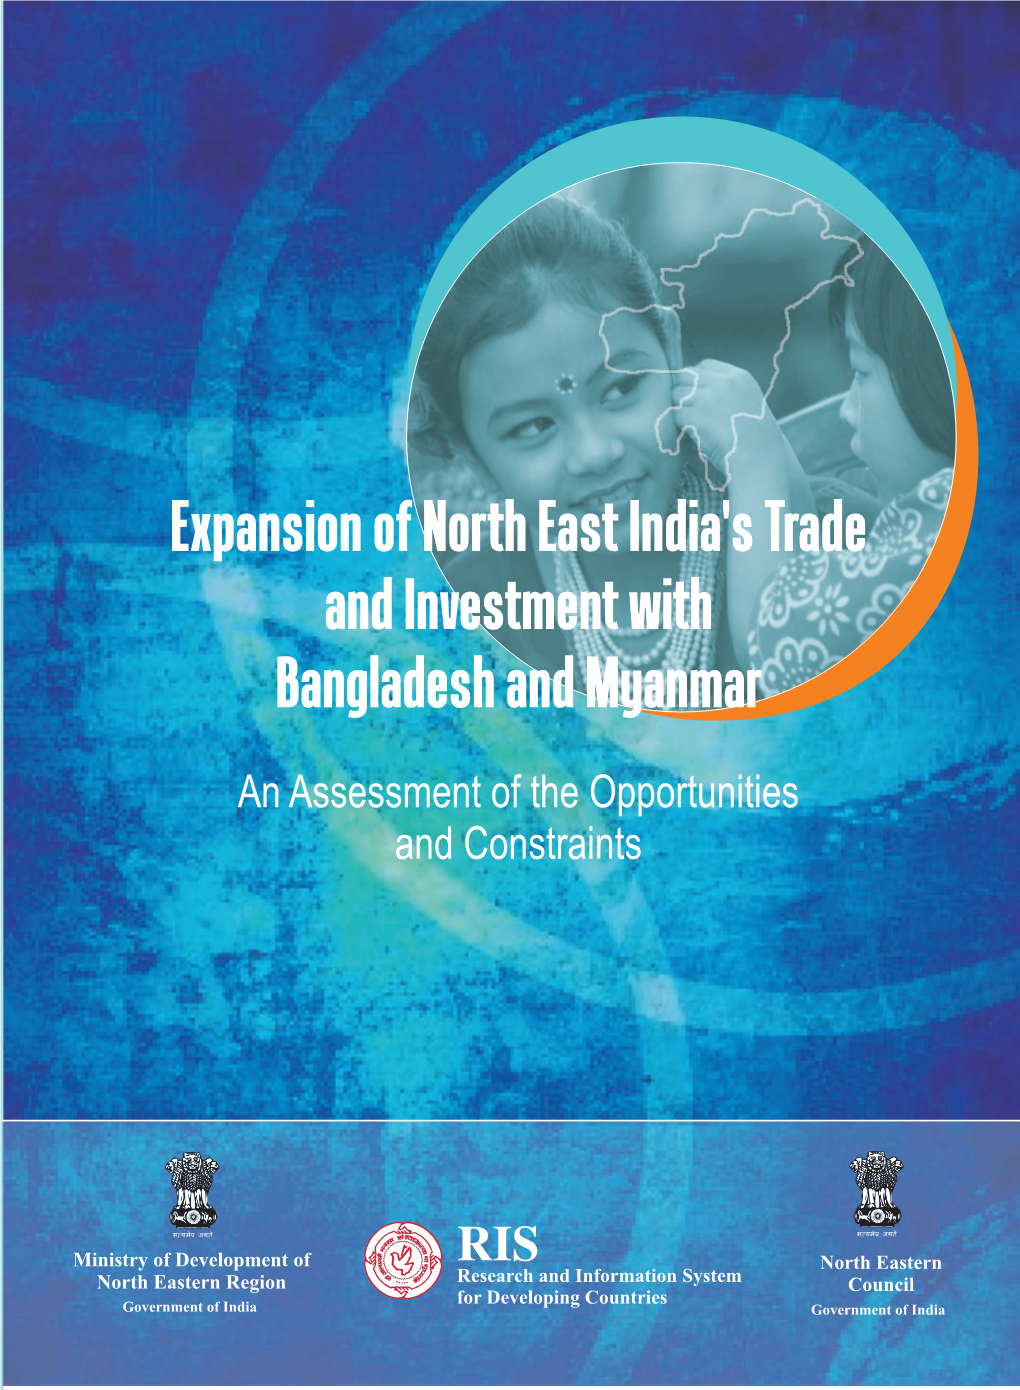 Expansion of North East India's Trade and Investment with Bangladesh